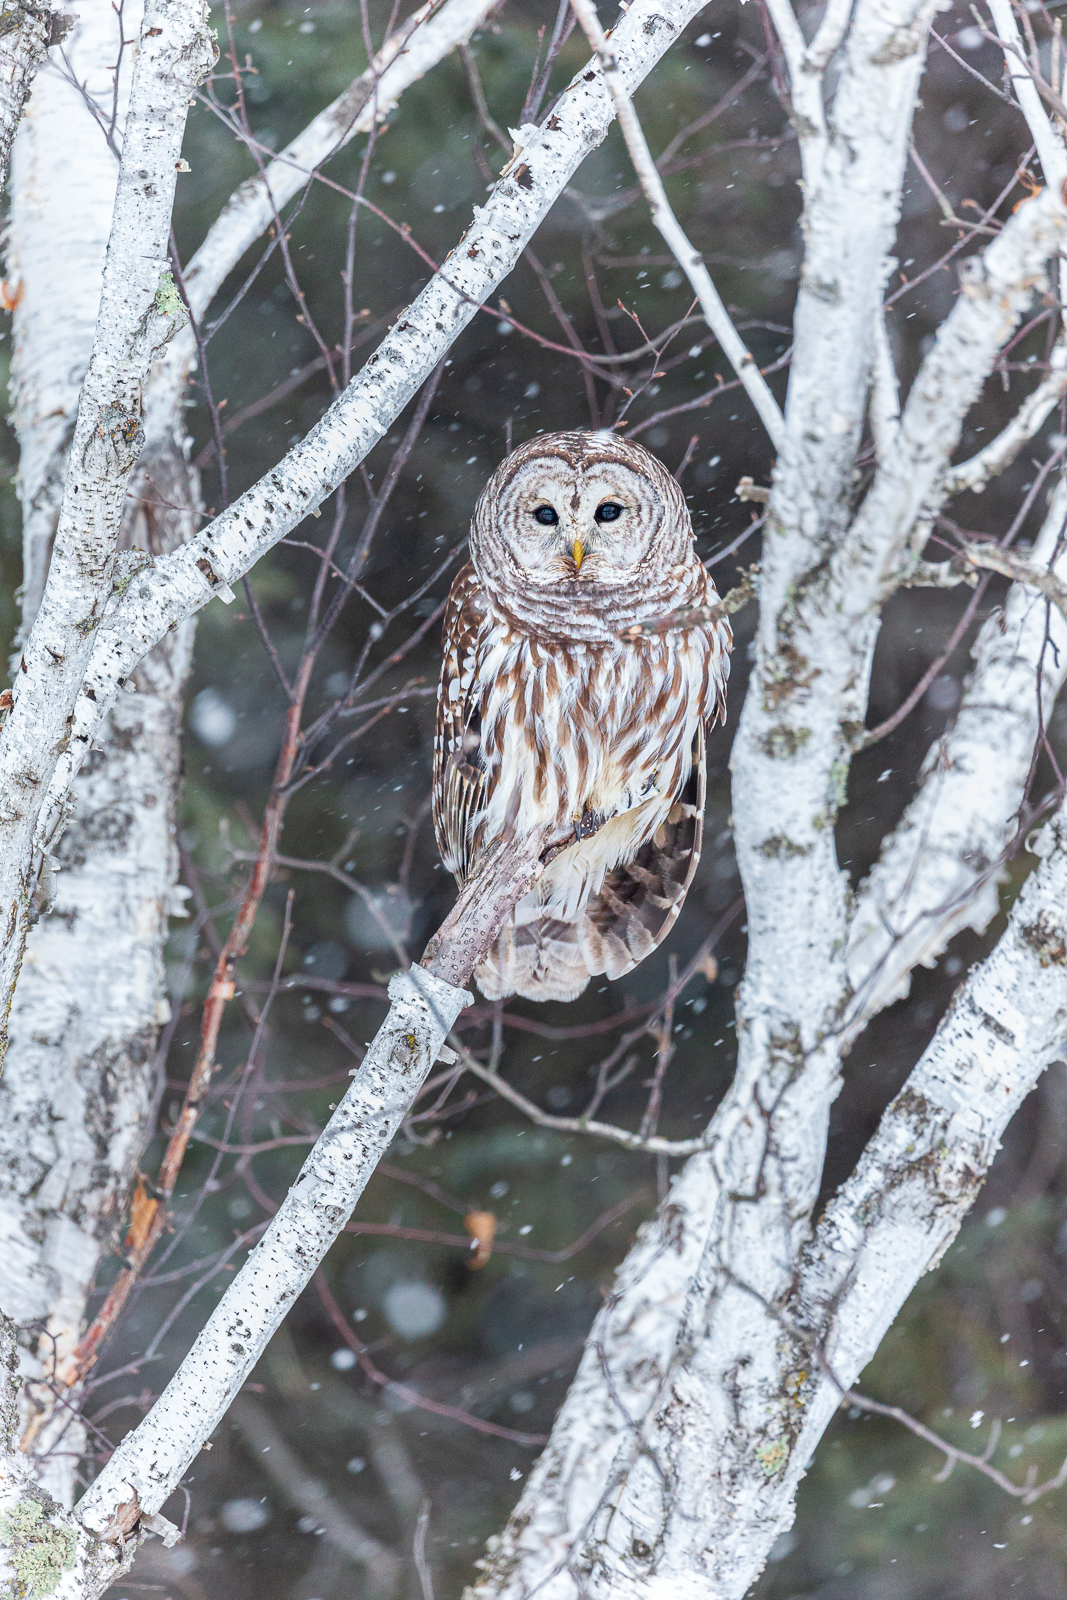 Wildlife photography of a Barred Owl perched in a birch tree in Minnesota snow